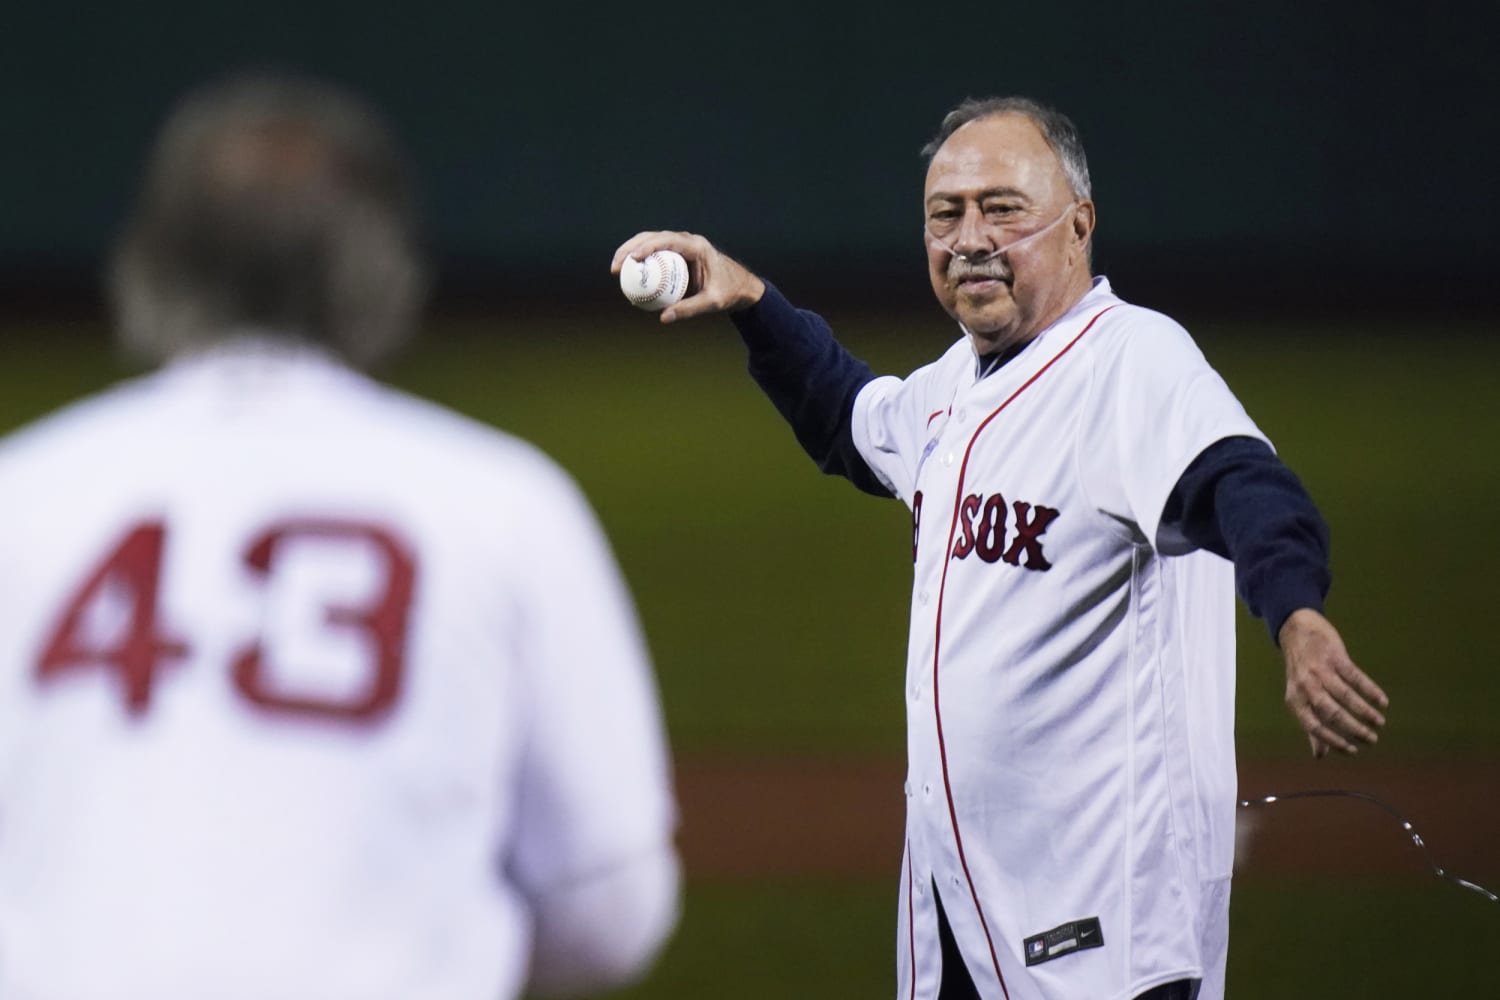 Jerry Remy, Red Sox player, announcer, dies at 68